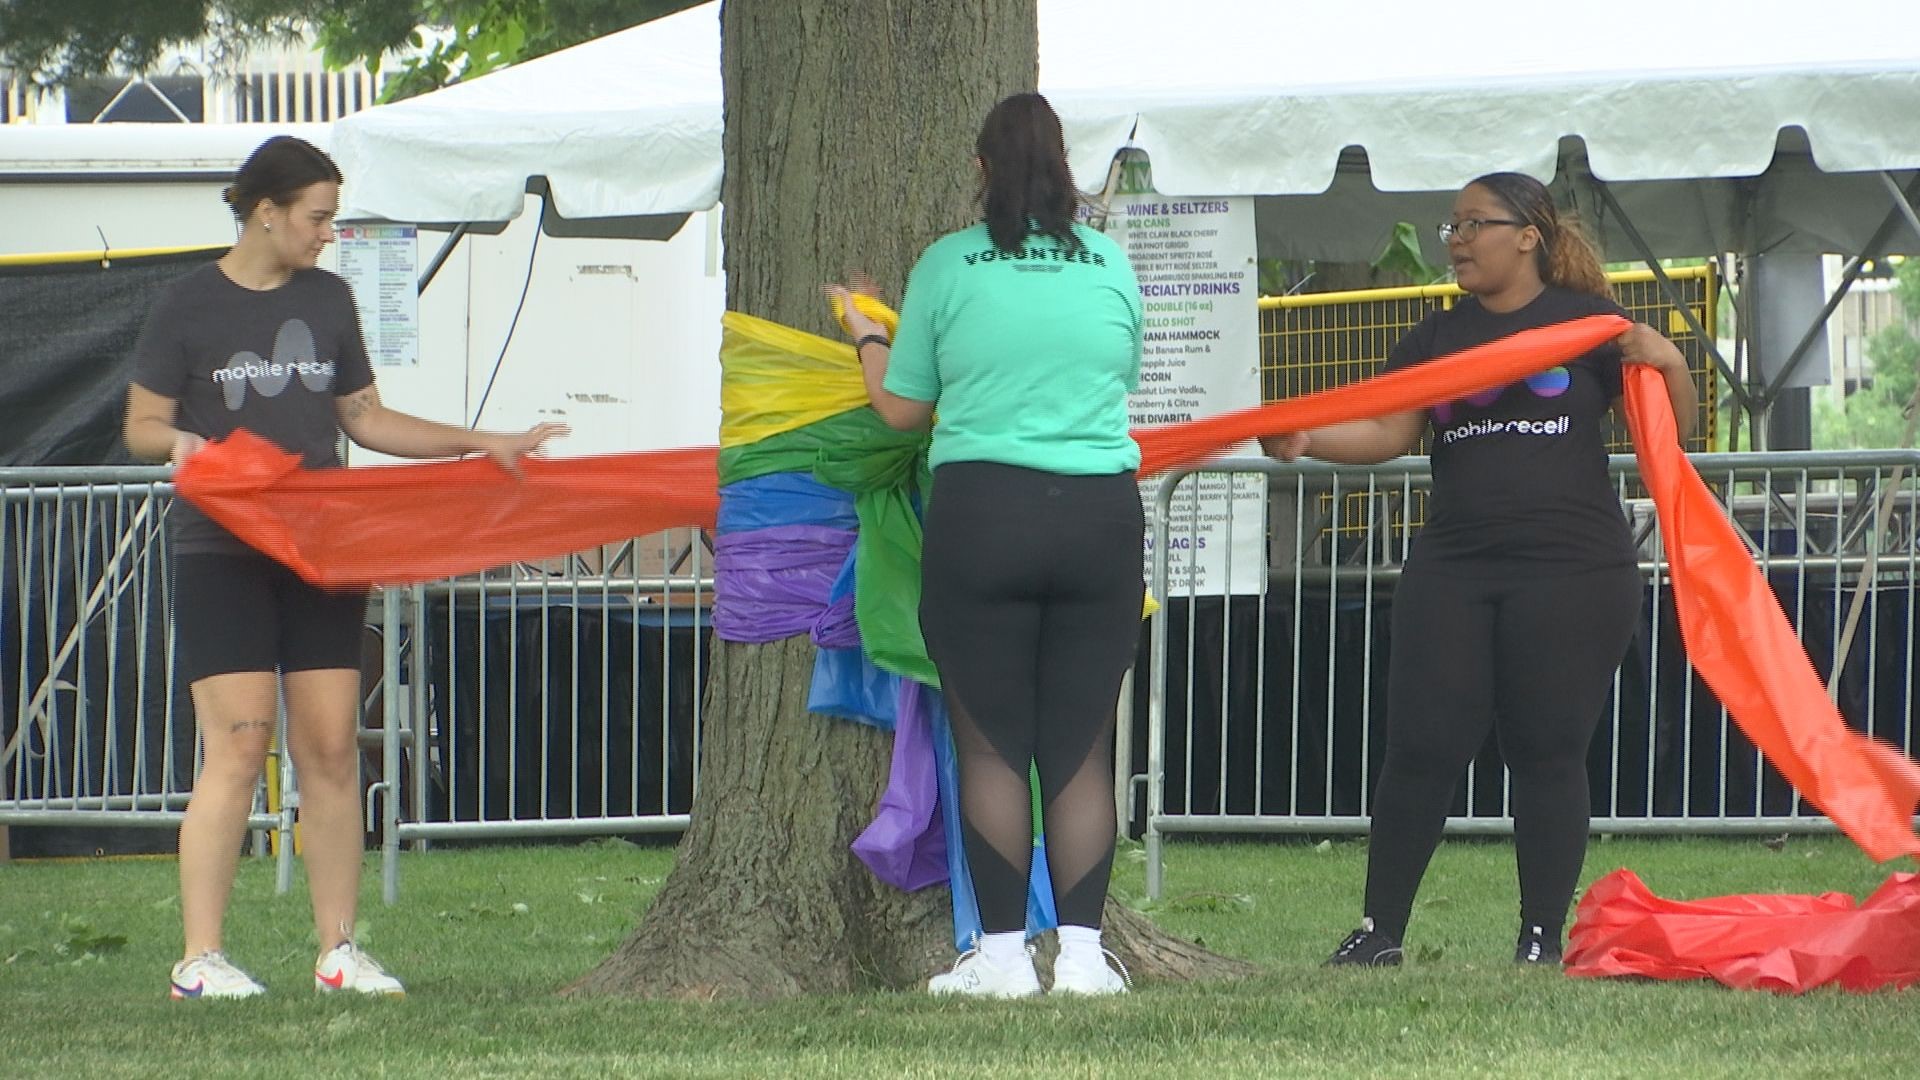 The Indy Pride Festival and Parade are back in person for the first time in two years. Volunteers say bringing it back is a labor of love.